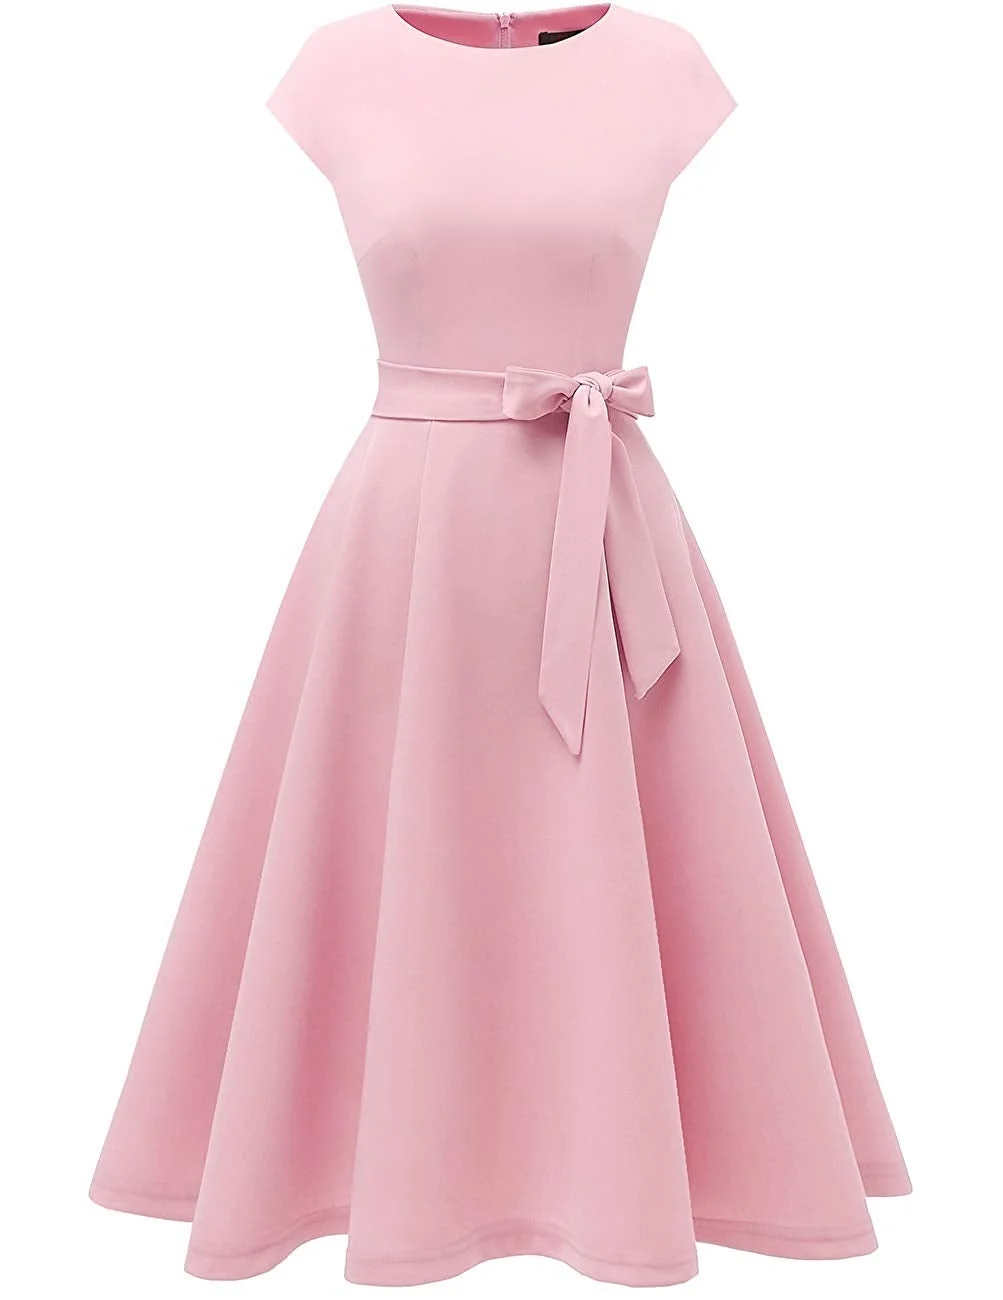 Women's Prom Tea Dress Vintage Swing Cocktail Party Dress with Cap-Sleeves